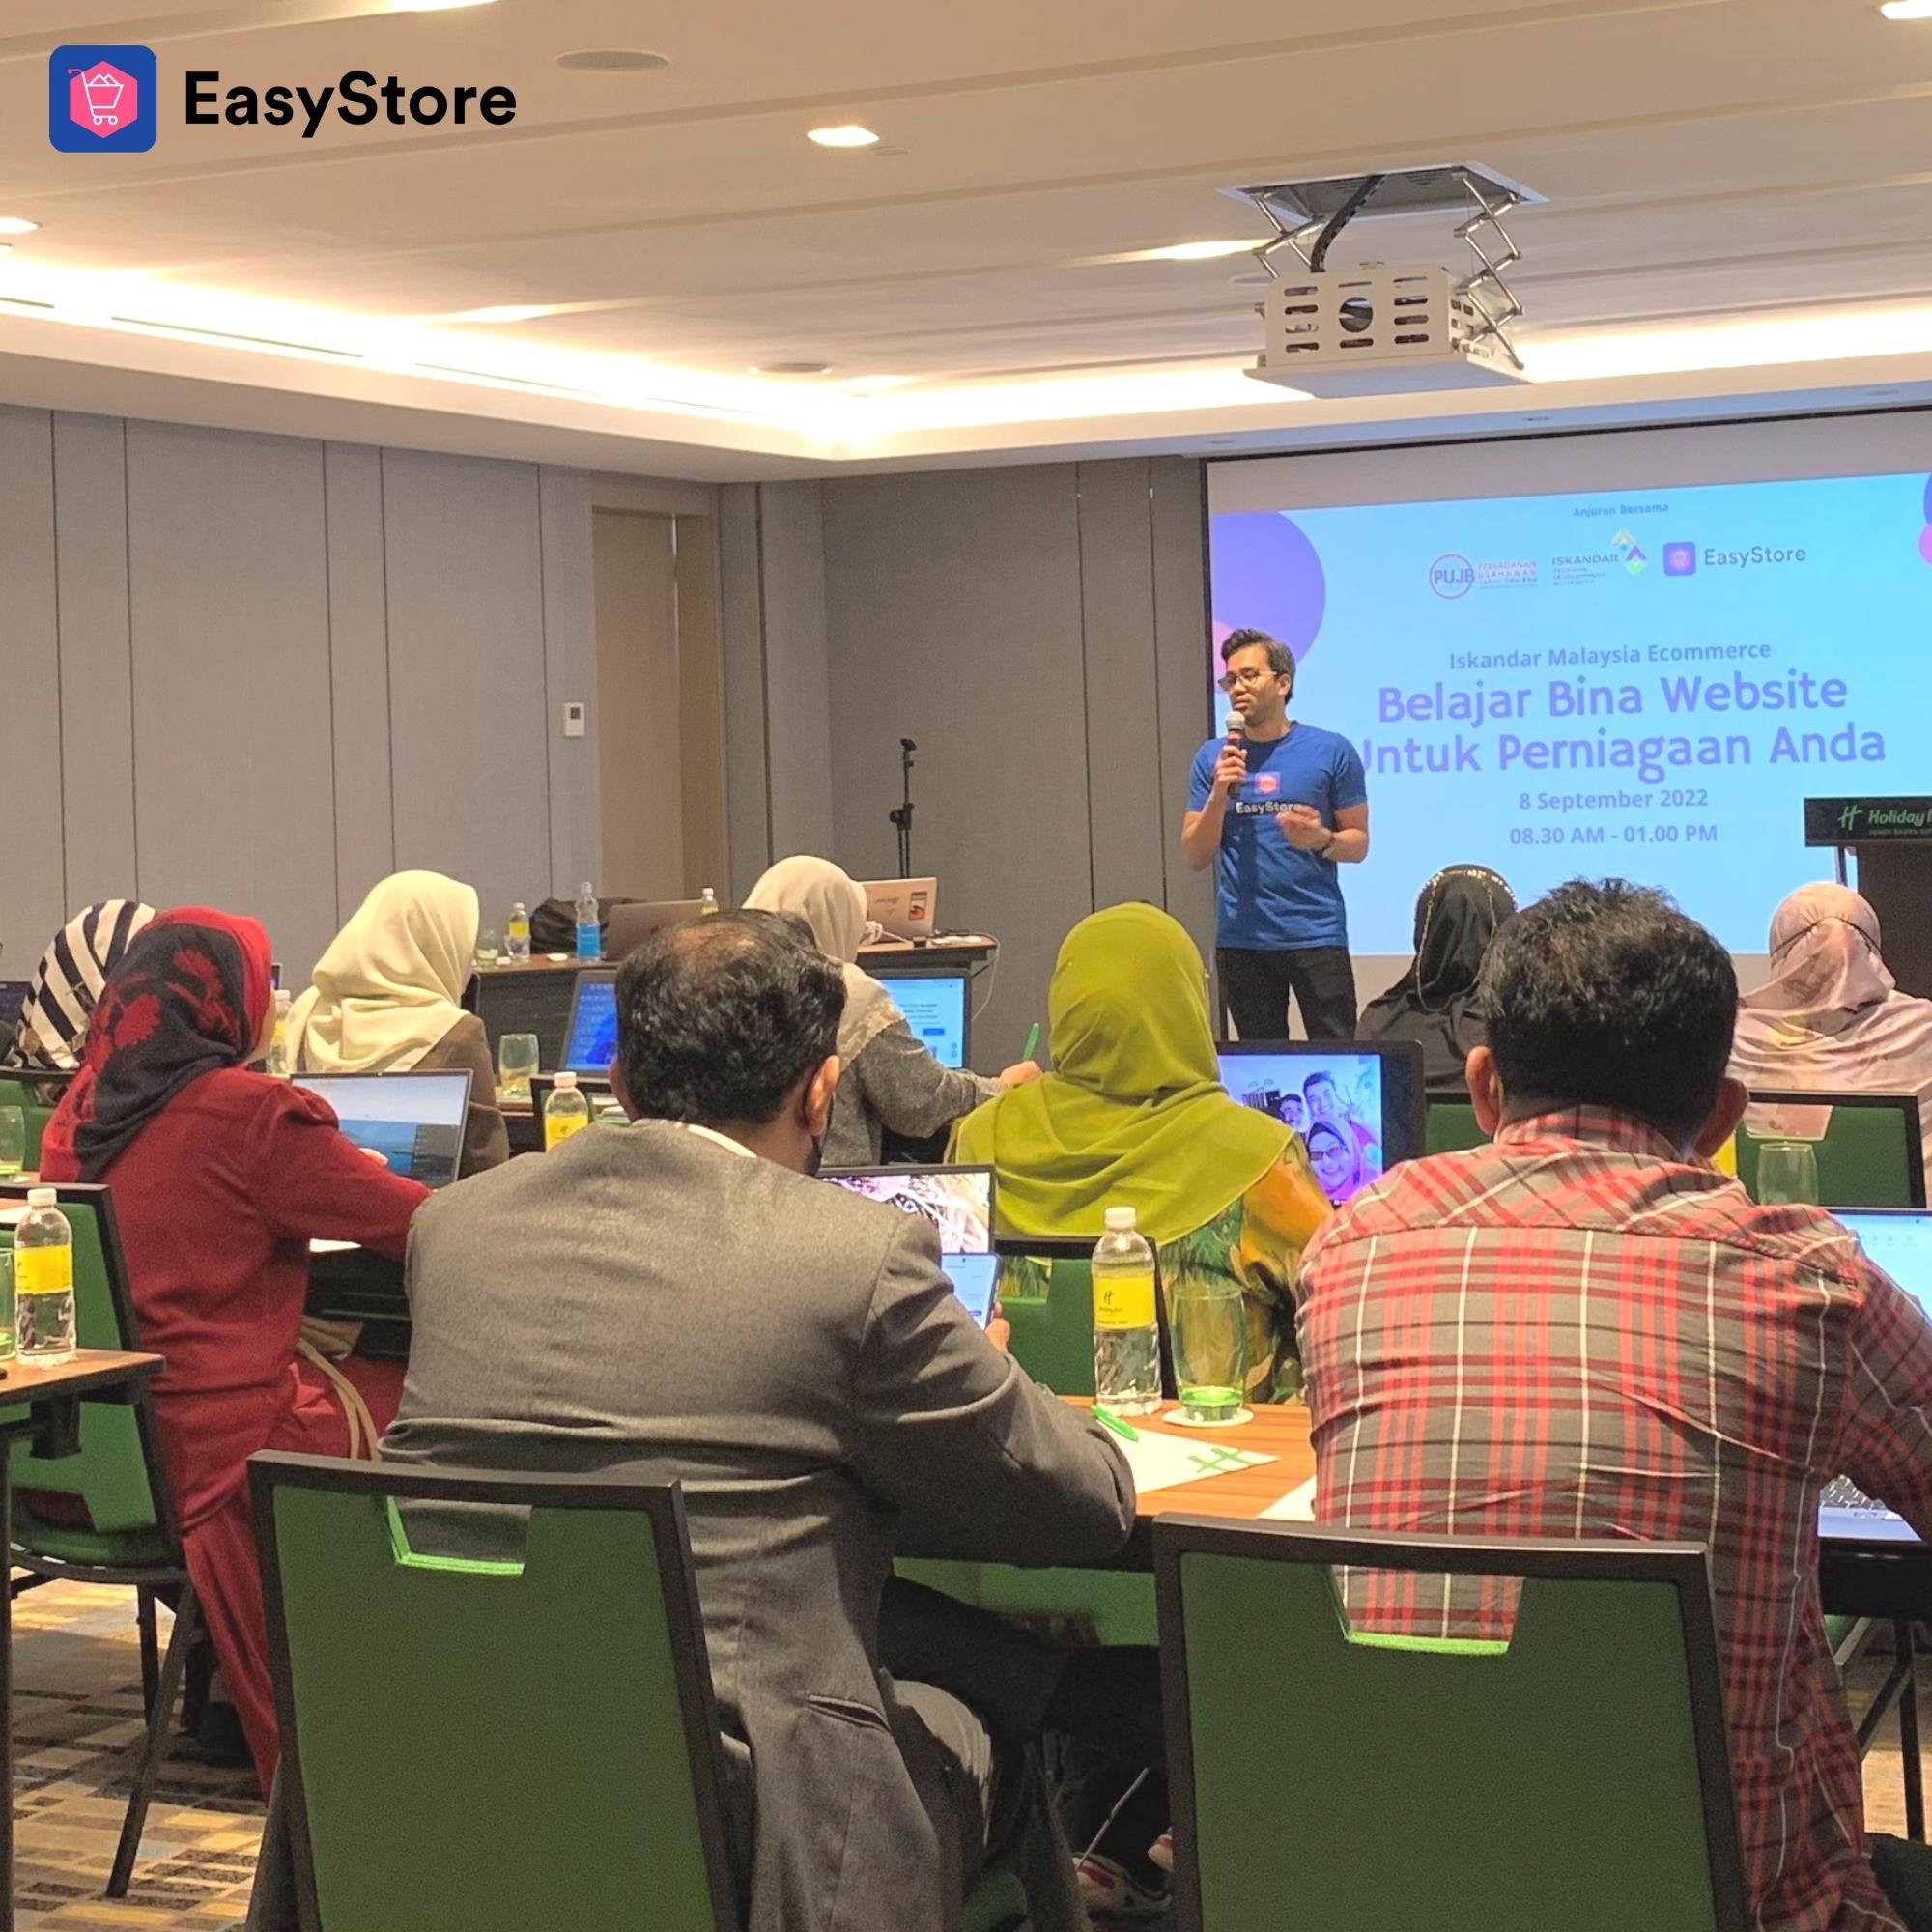 EasyStore Teams Up With Iskandar Malaysia To Organize Ecommerce Workshop in Johor | EasyStore